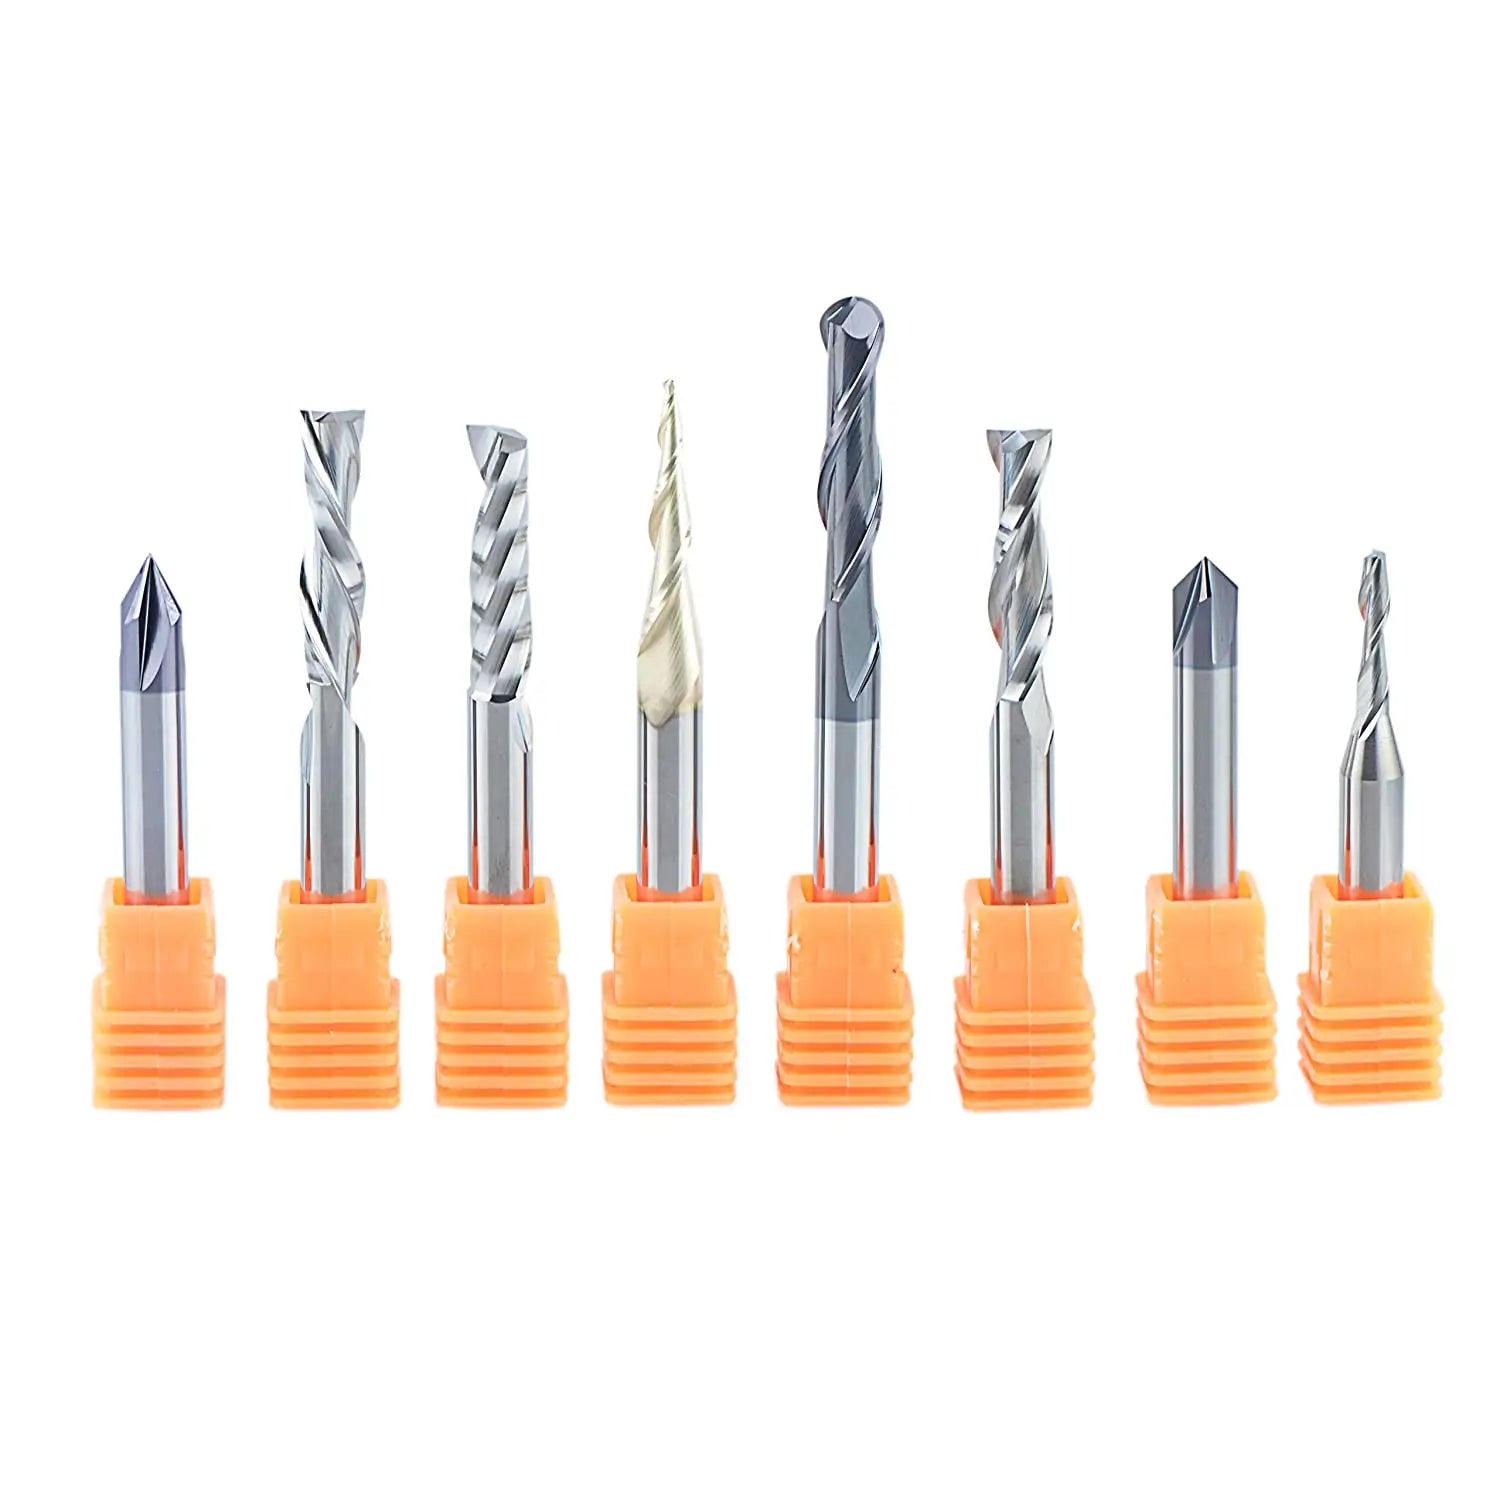 TOOLDO Router Bits Set 50 Pieces,1/4” Shank Tungsten Carbide Router Bits,  Professional Router Bit Kit for DIY, Woodworking